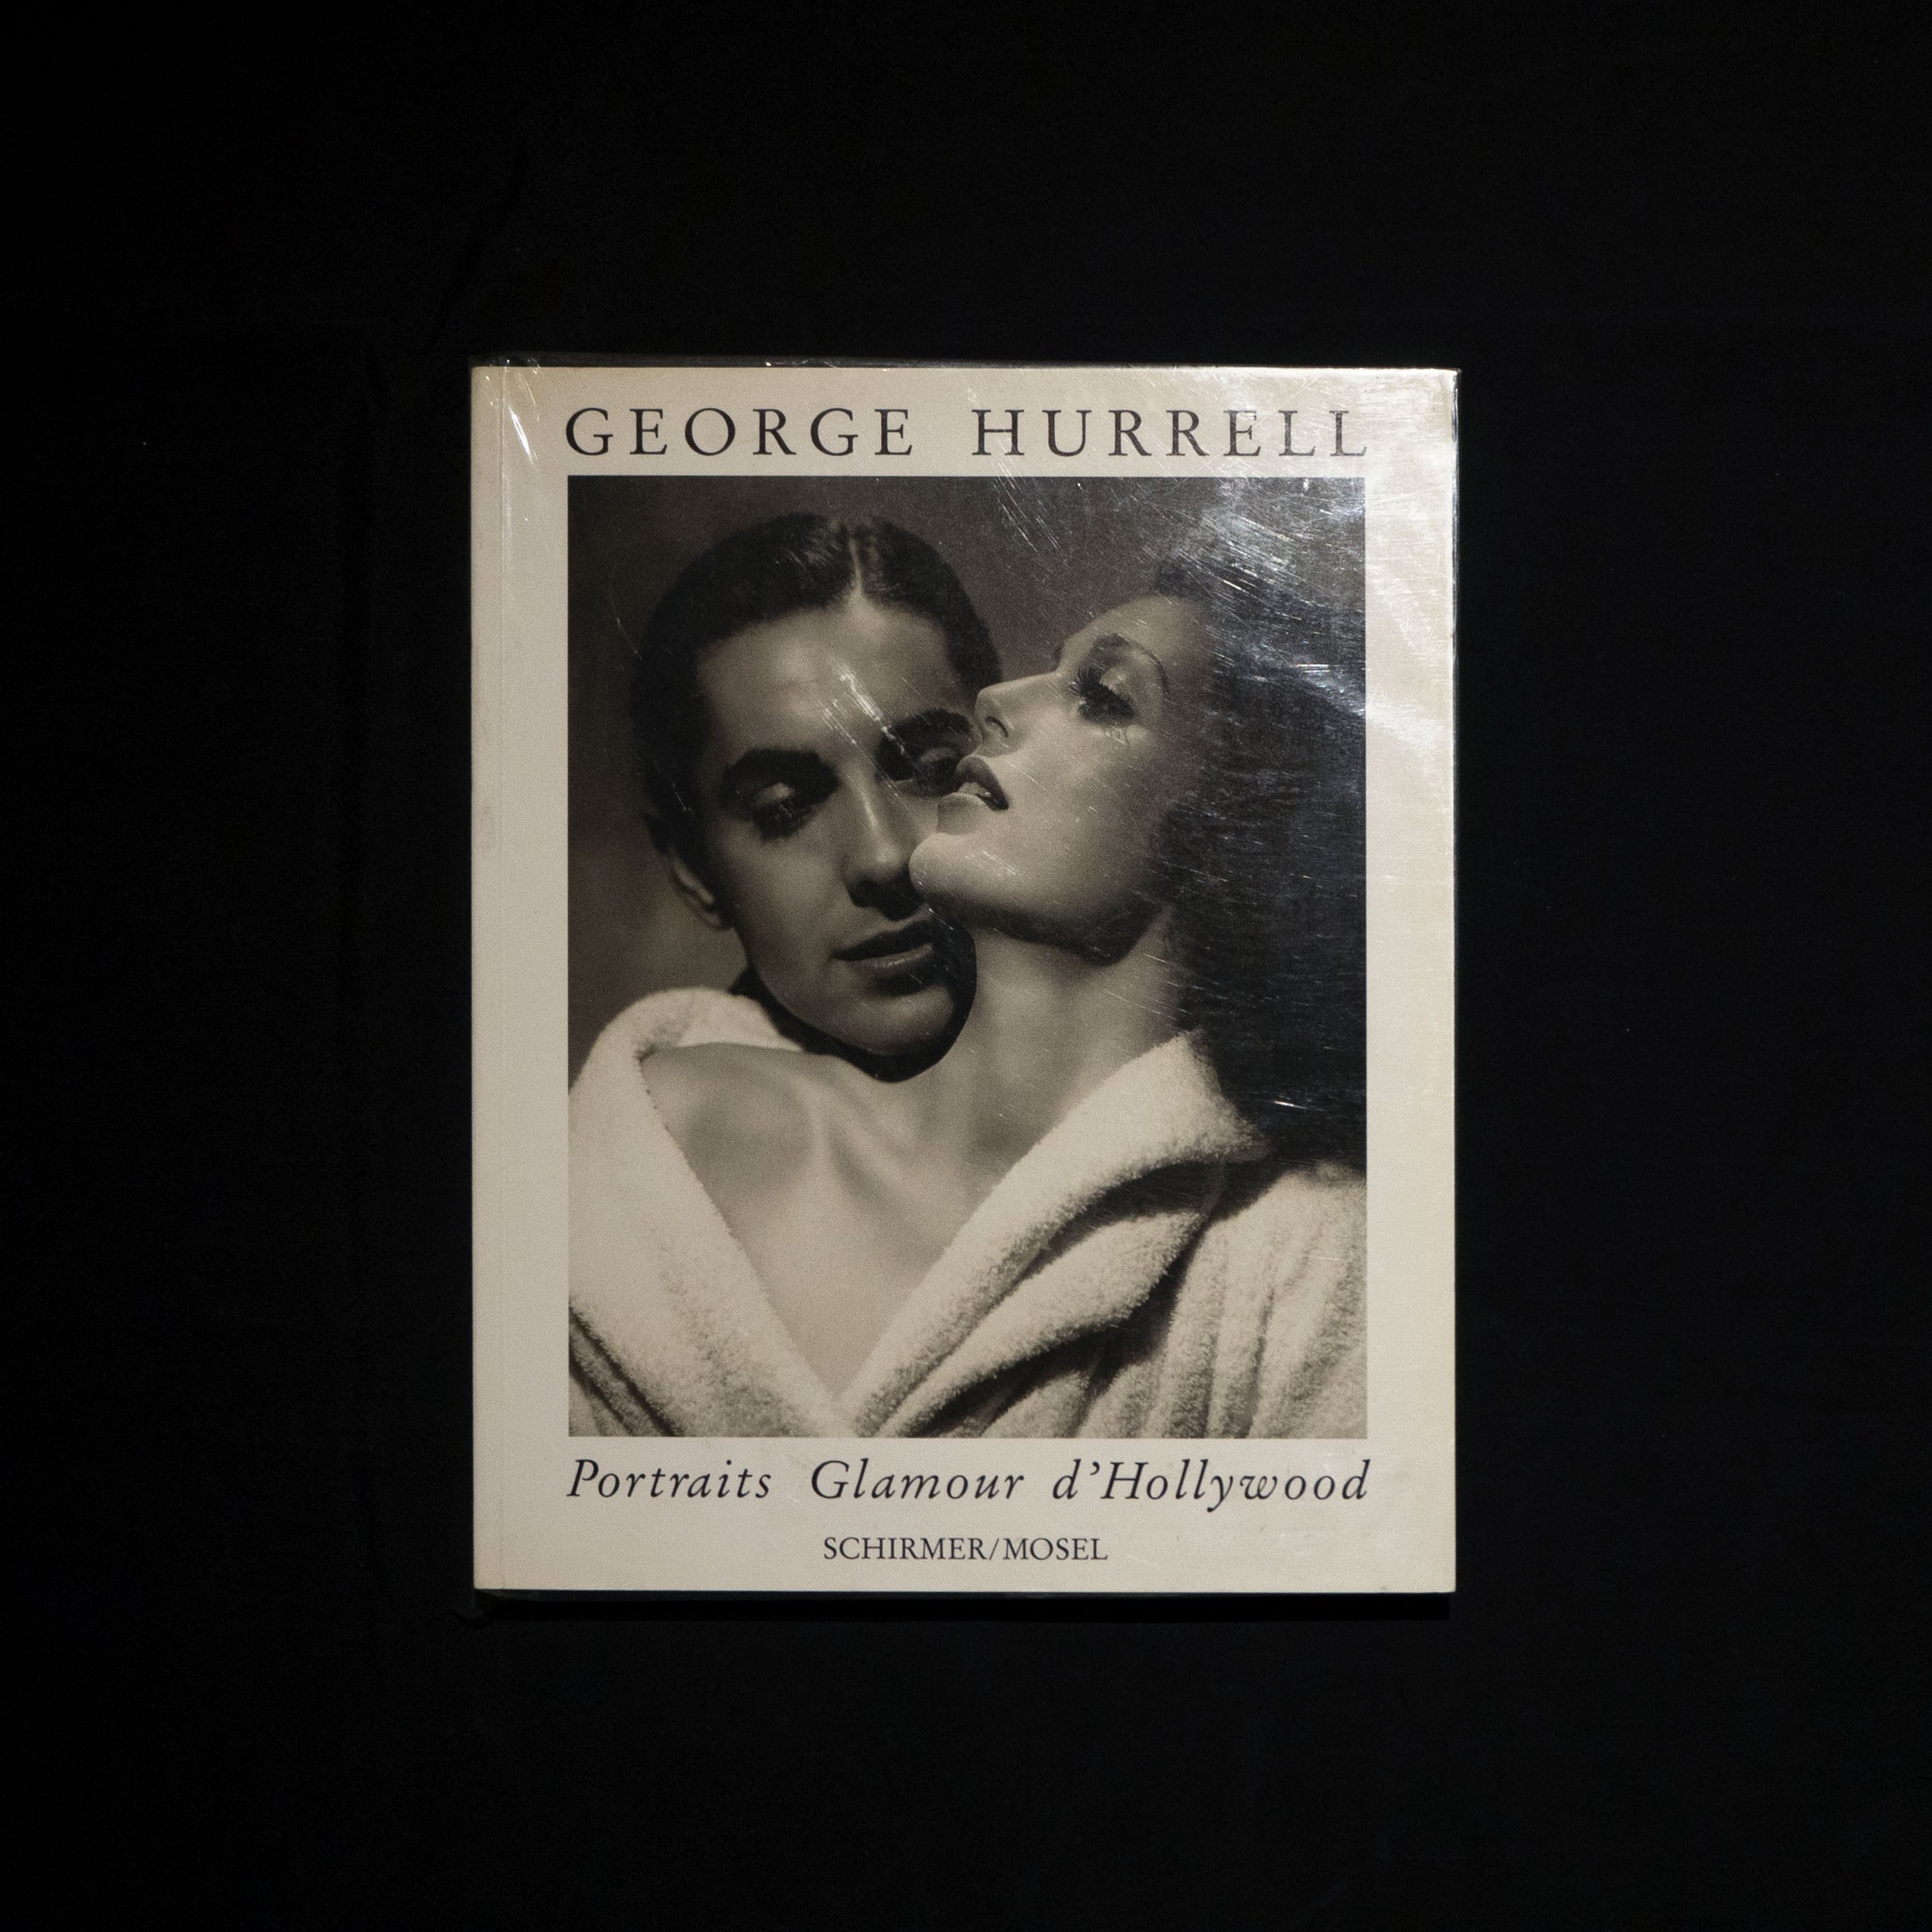 GLAMOUR PORTRAITS OF HOLLYWOOD - George Hurrell